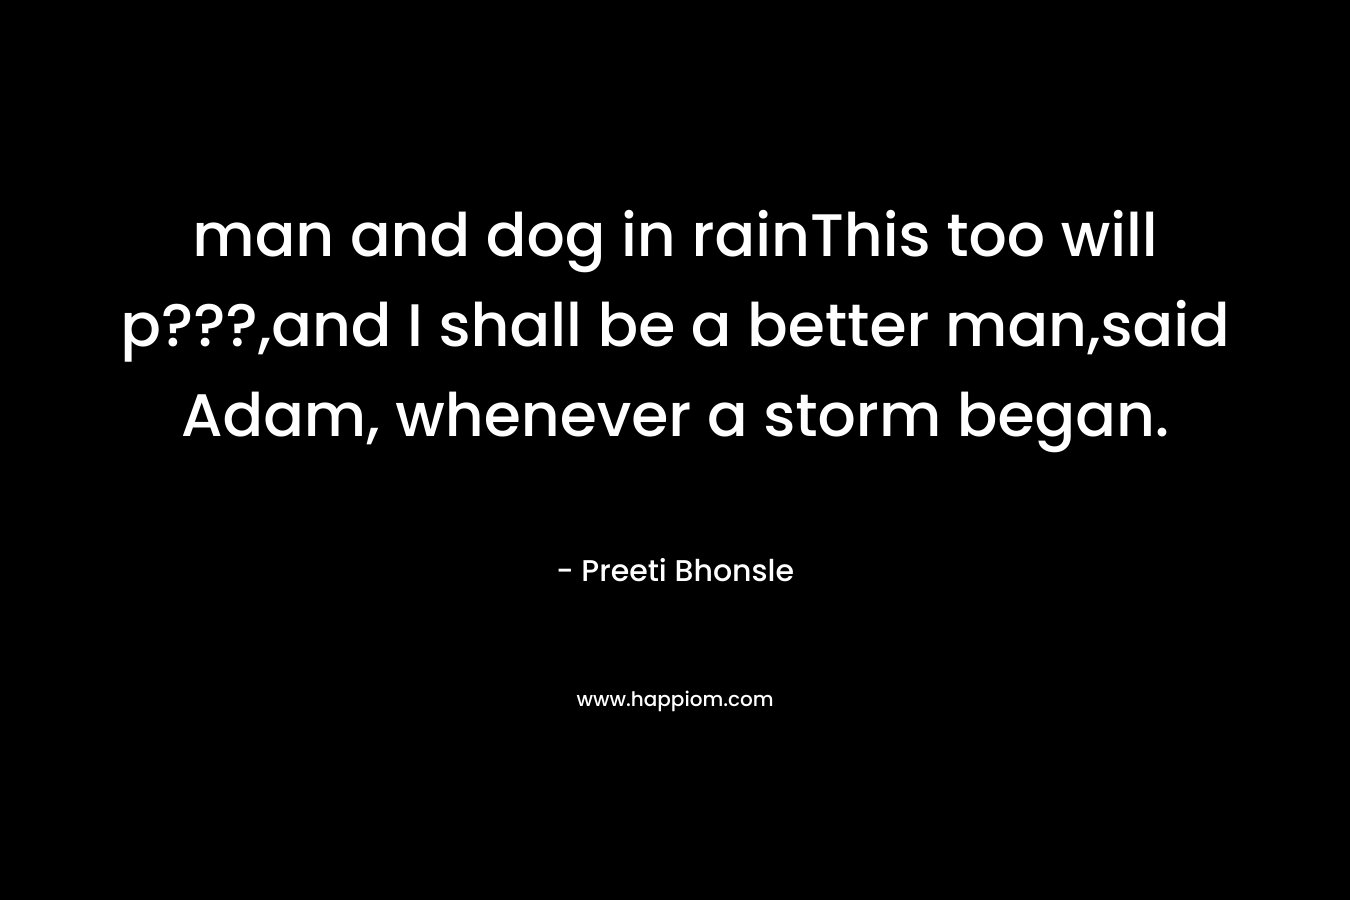 man and dog in rainThis too will p???,and I shall be a better man,said Adam, whenever a storm began.